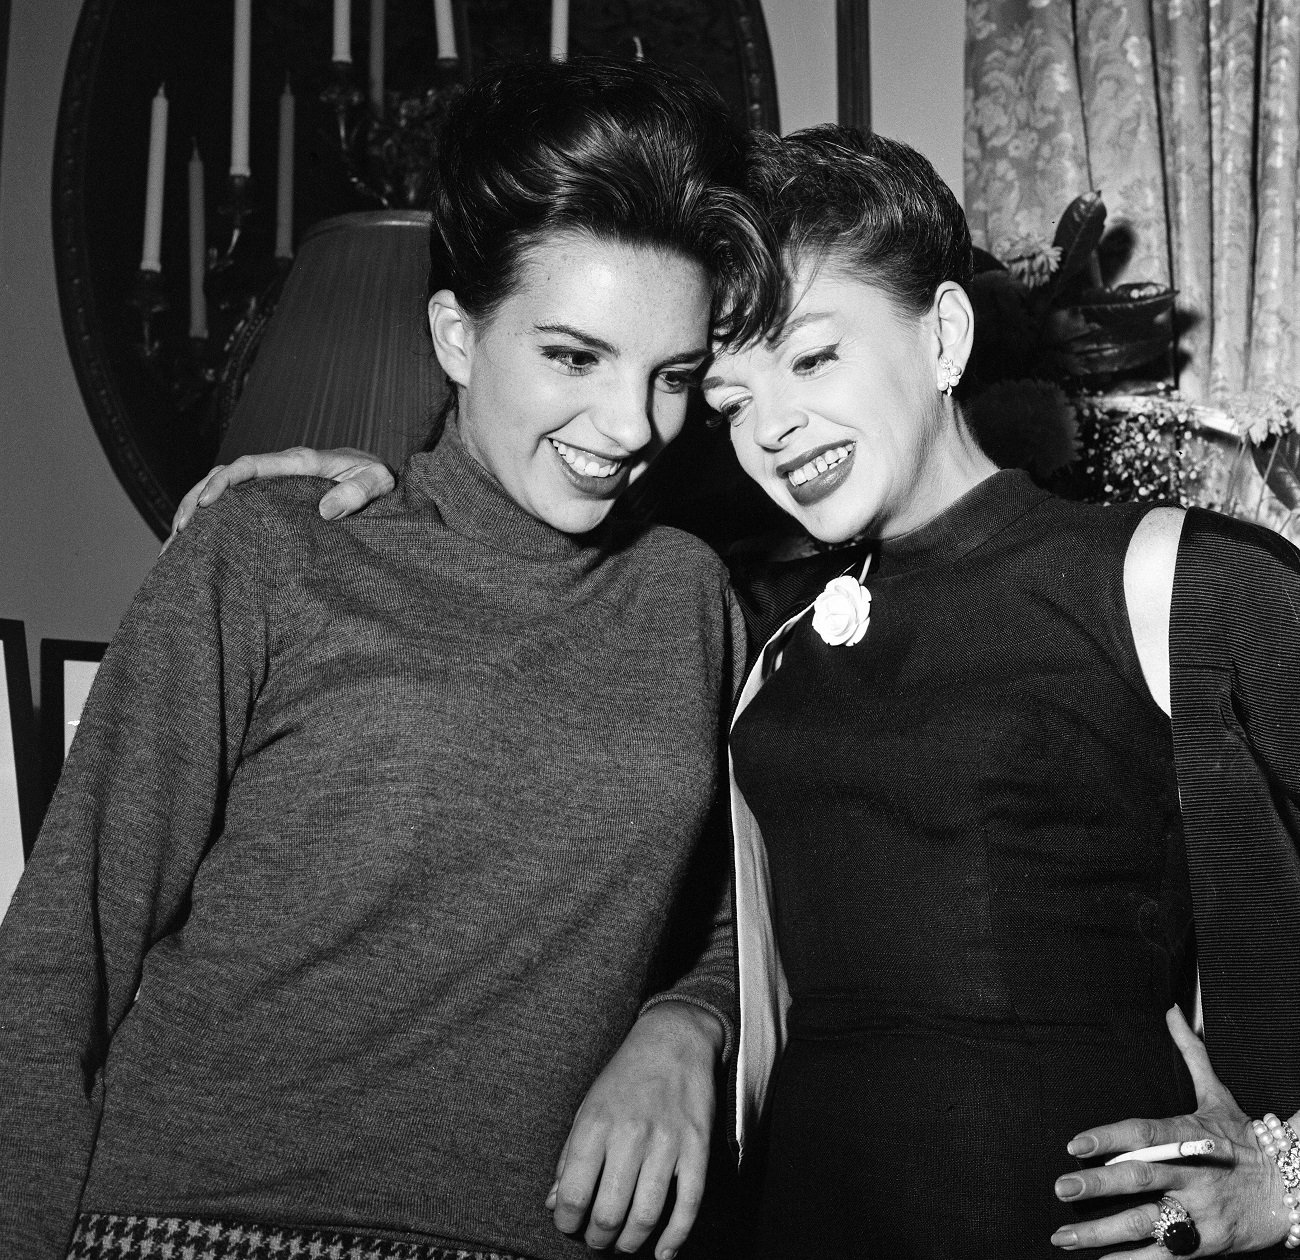 A black and white picture of Liza Minnelli and Judy Garland. Judy Garland has her arm around Liza Minnelli.